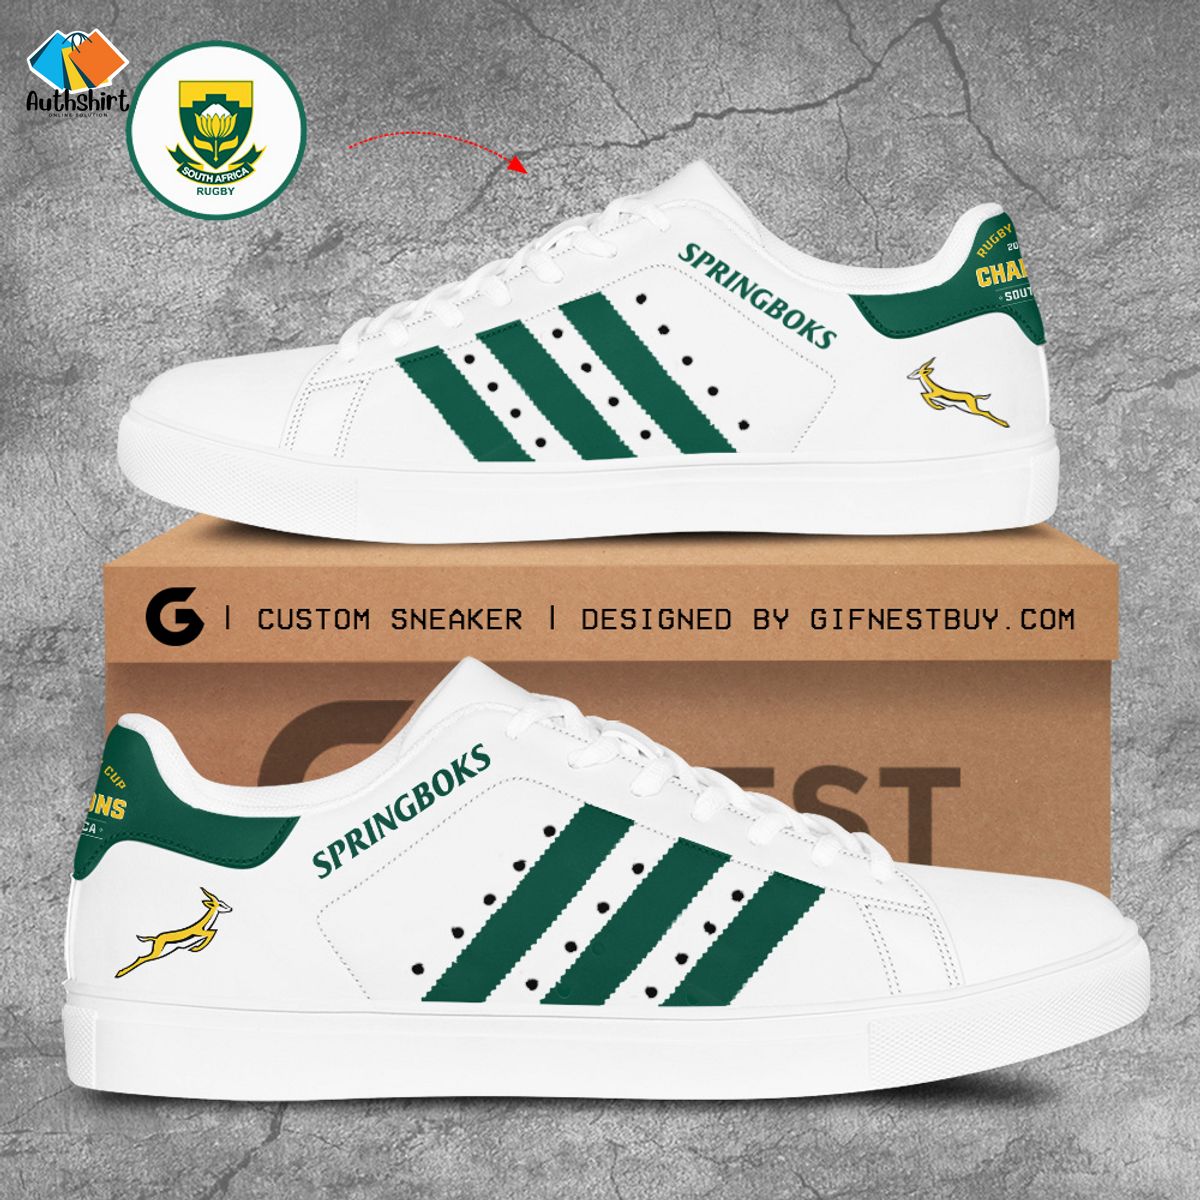 South Africa Springboks x Rugby World Cup Stan Smith Shoes